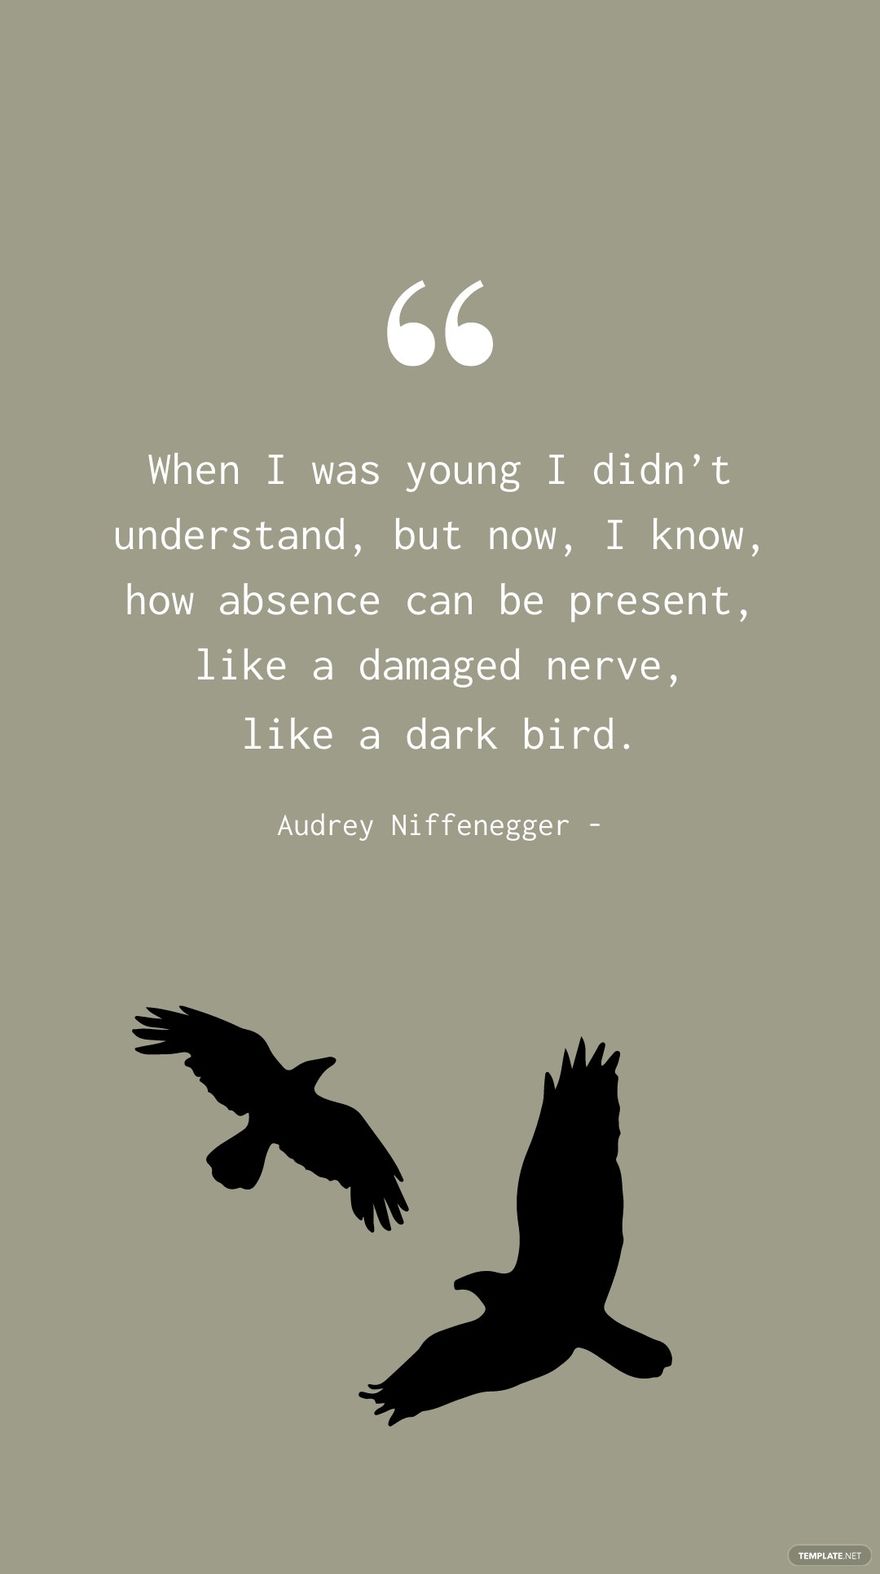 Audrey Niffenegger - When I was young I didn’t understand, but now, I know, how absence can be present, like a damaged nerve, like a dark bird.